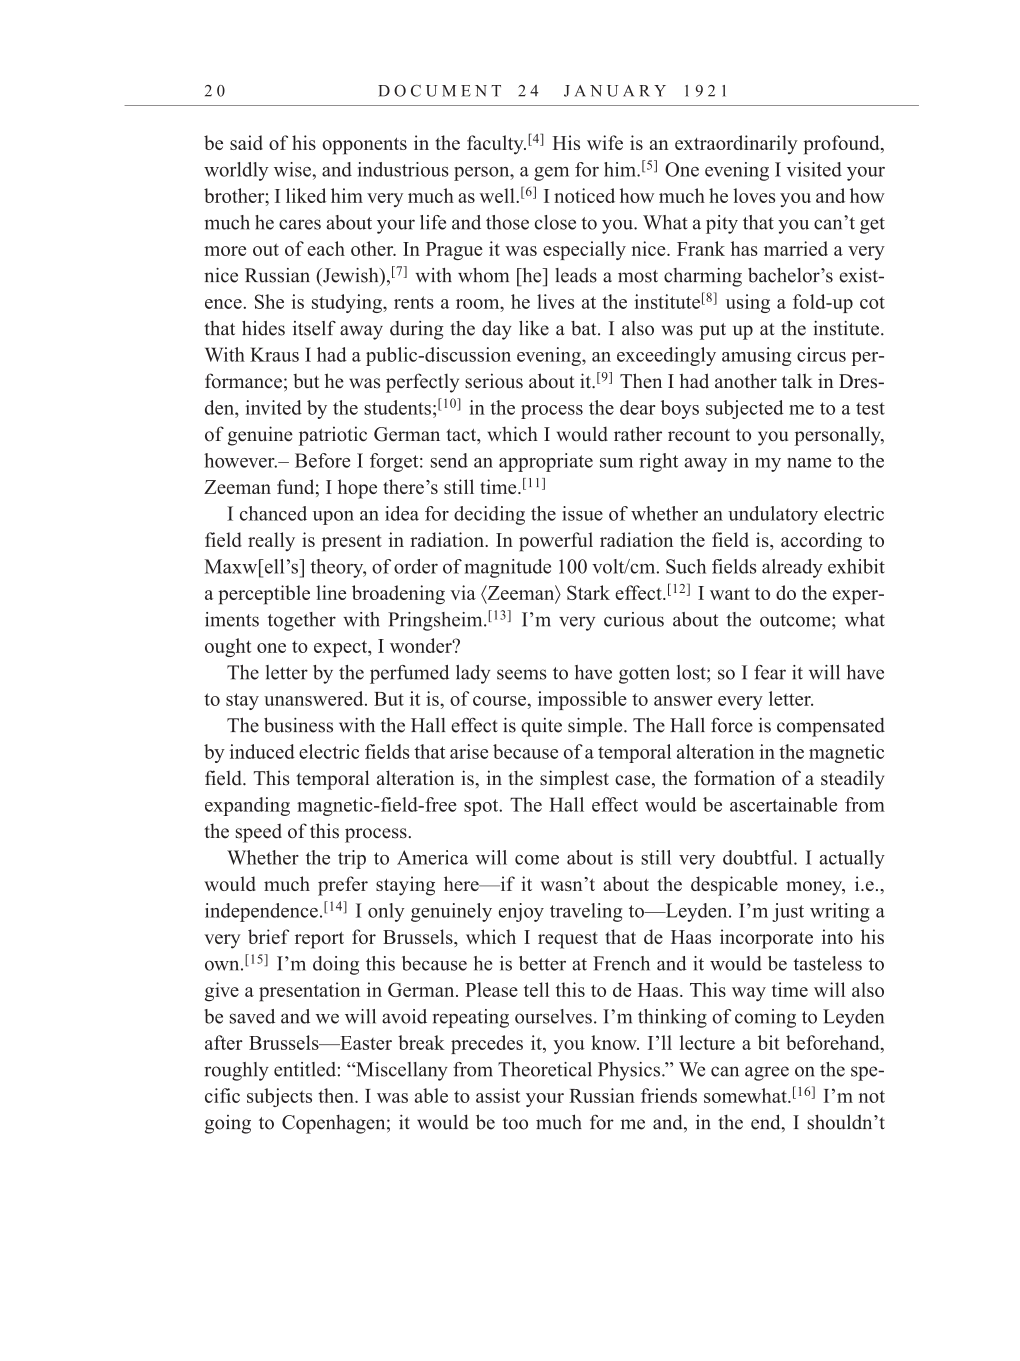 Volume 12: The Berlin Years: Correspondence, January-December 1921 (English translation supplement) page 20